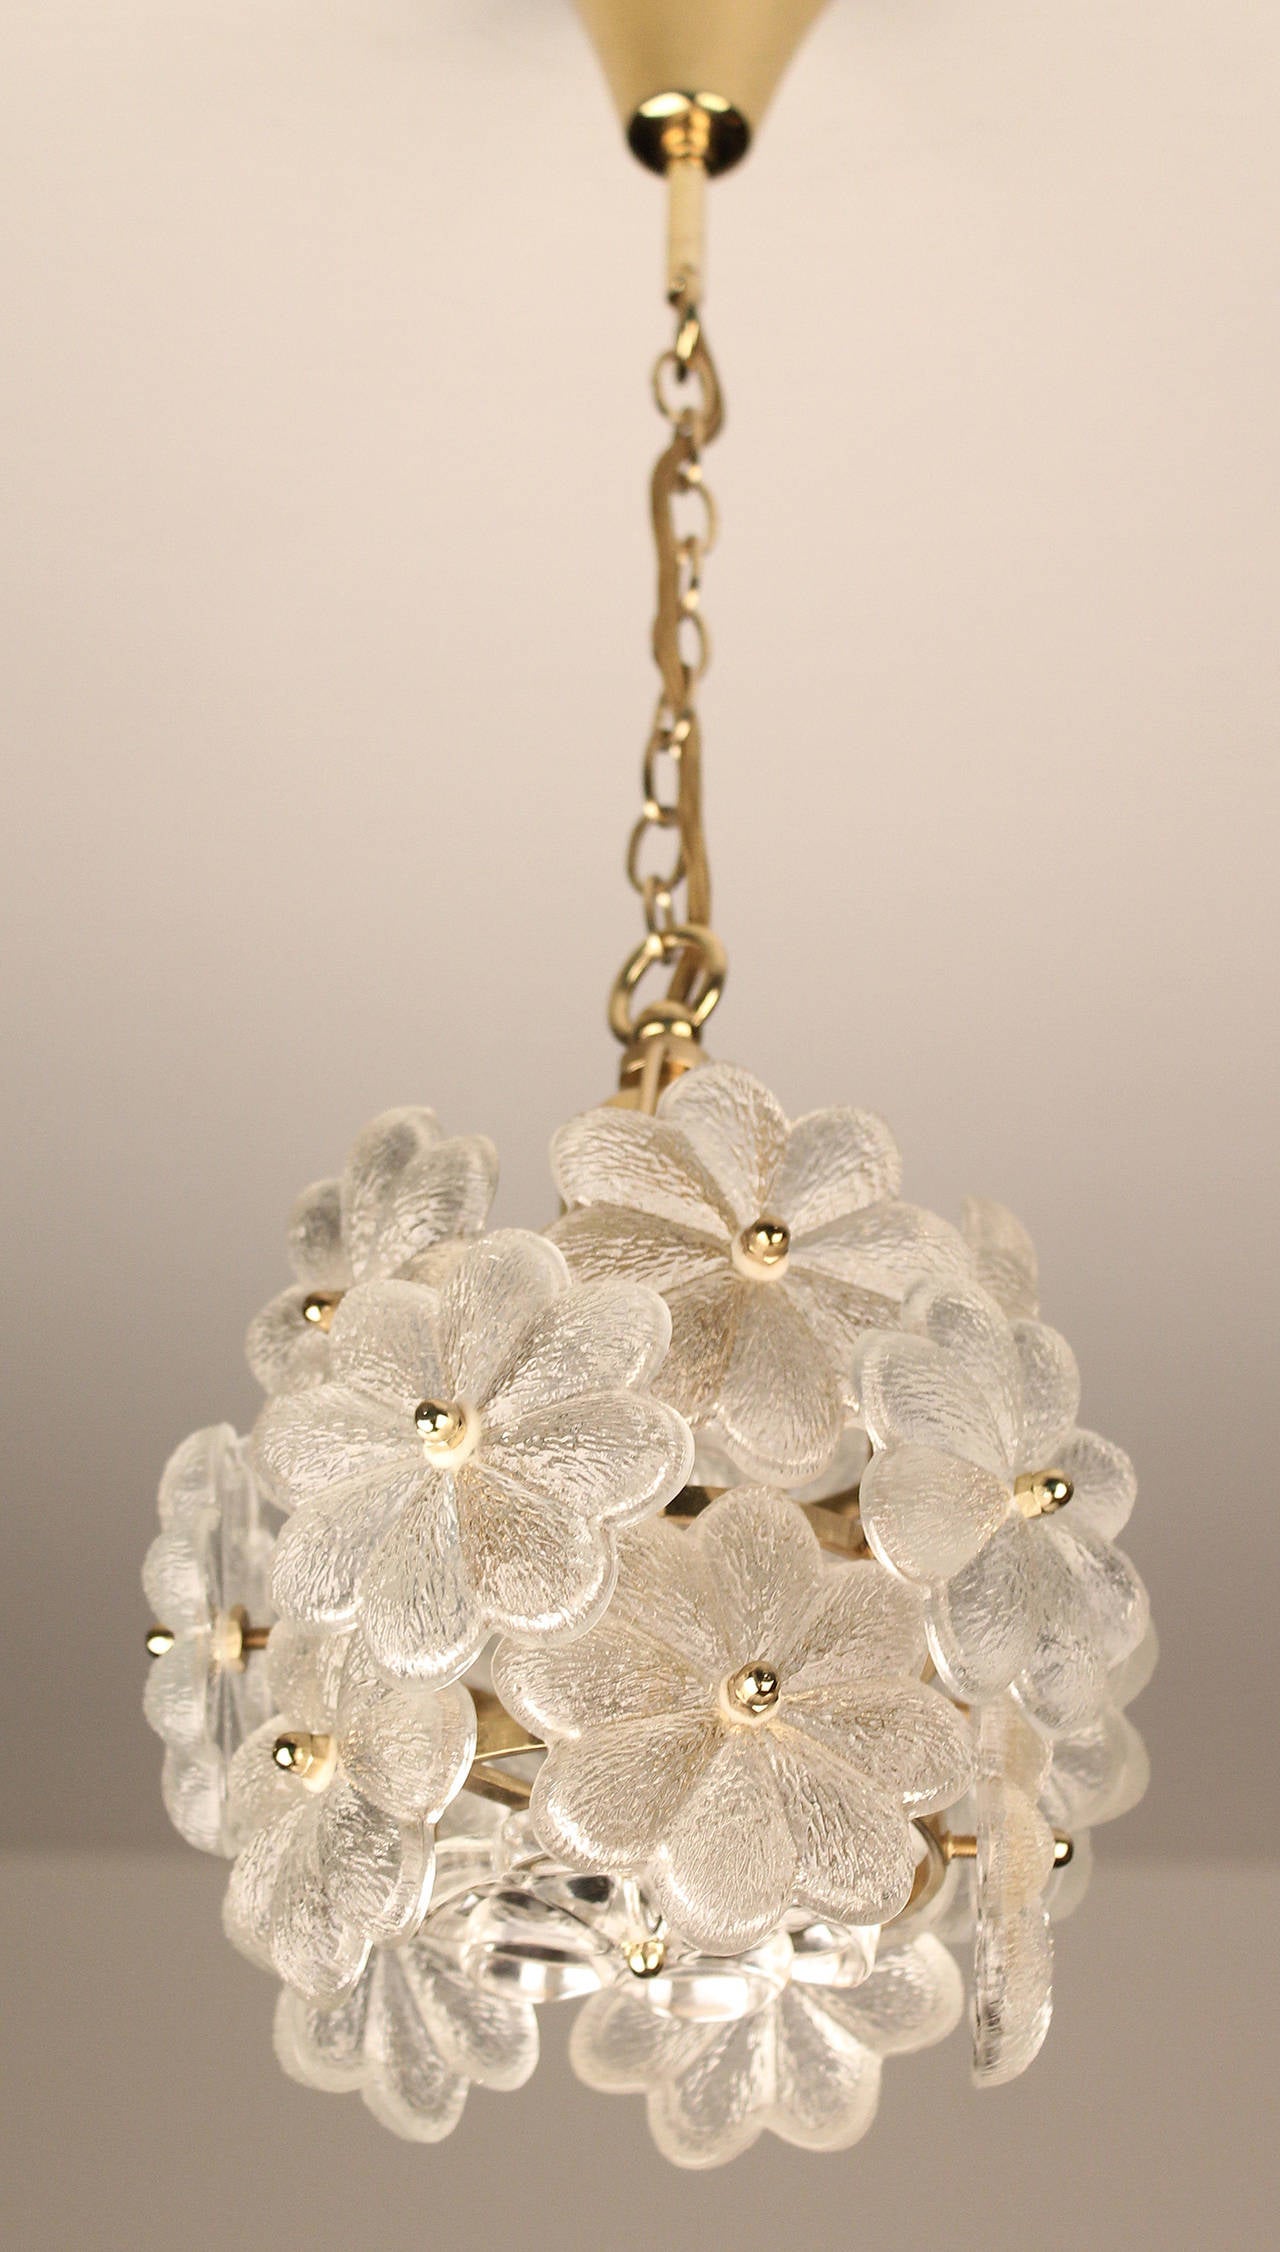 Petite Ernst Palme chandelier with glass flowers over a brass structure.

One standard size bulb up to 100 watts. run on voltage from 110 till 240 volts

height indicated is with chain, chain can be shortened.

